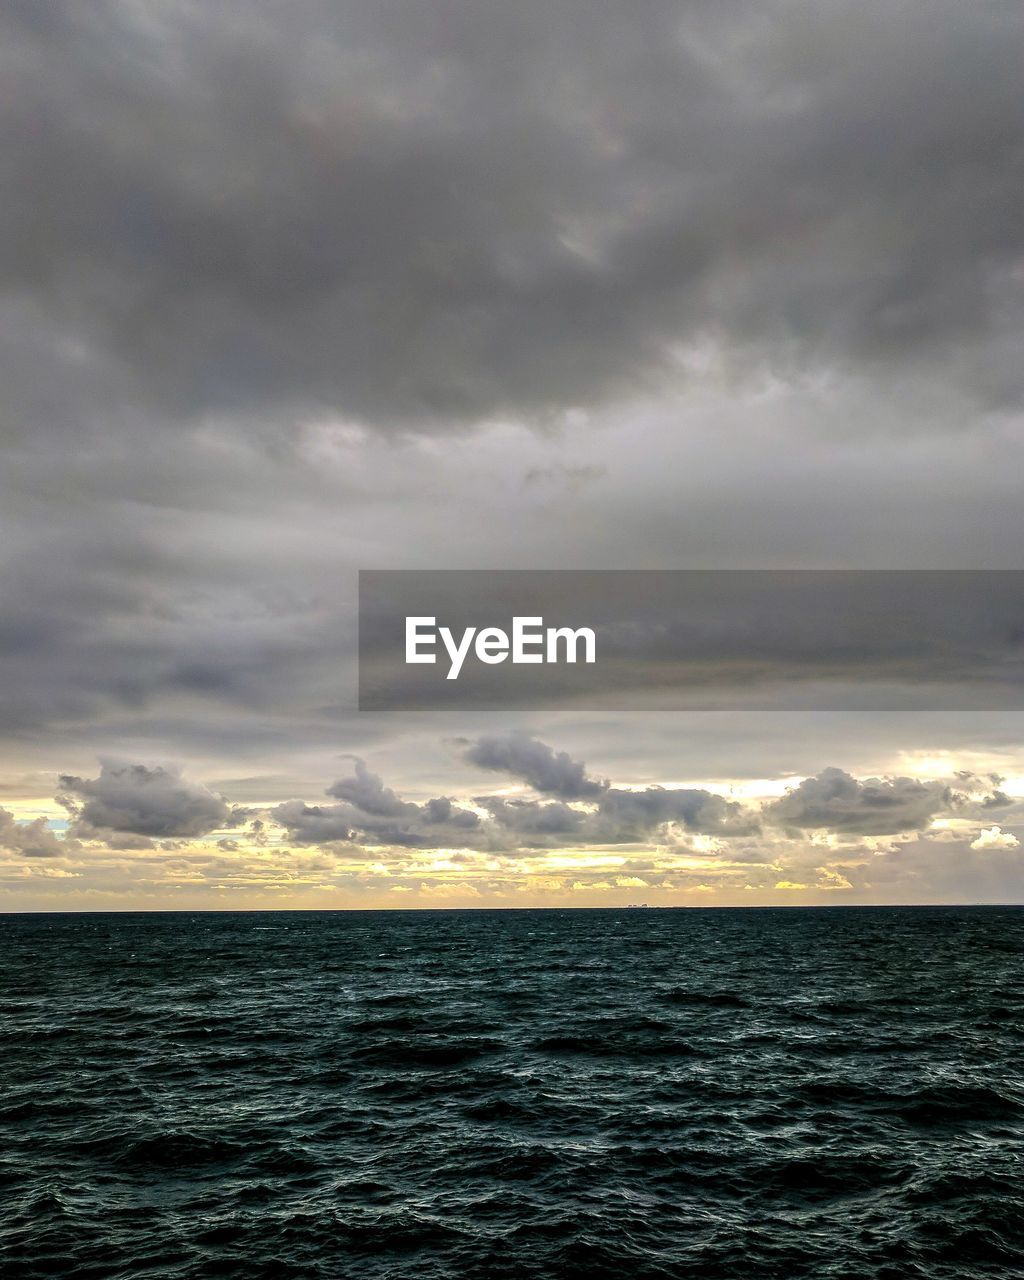 SCENIC VIEW OF SEA AGAINST CLOUDY SKY